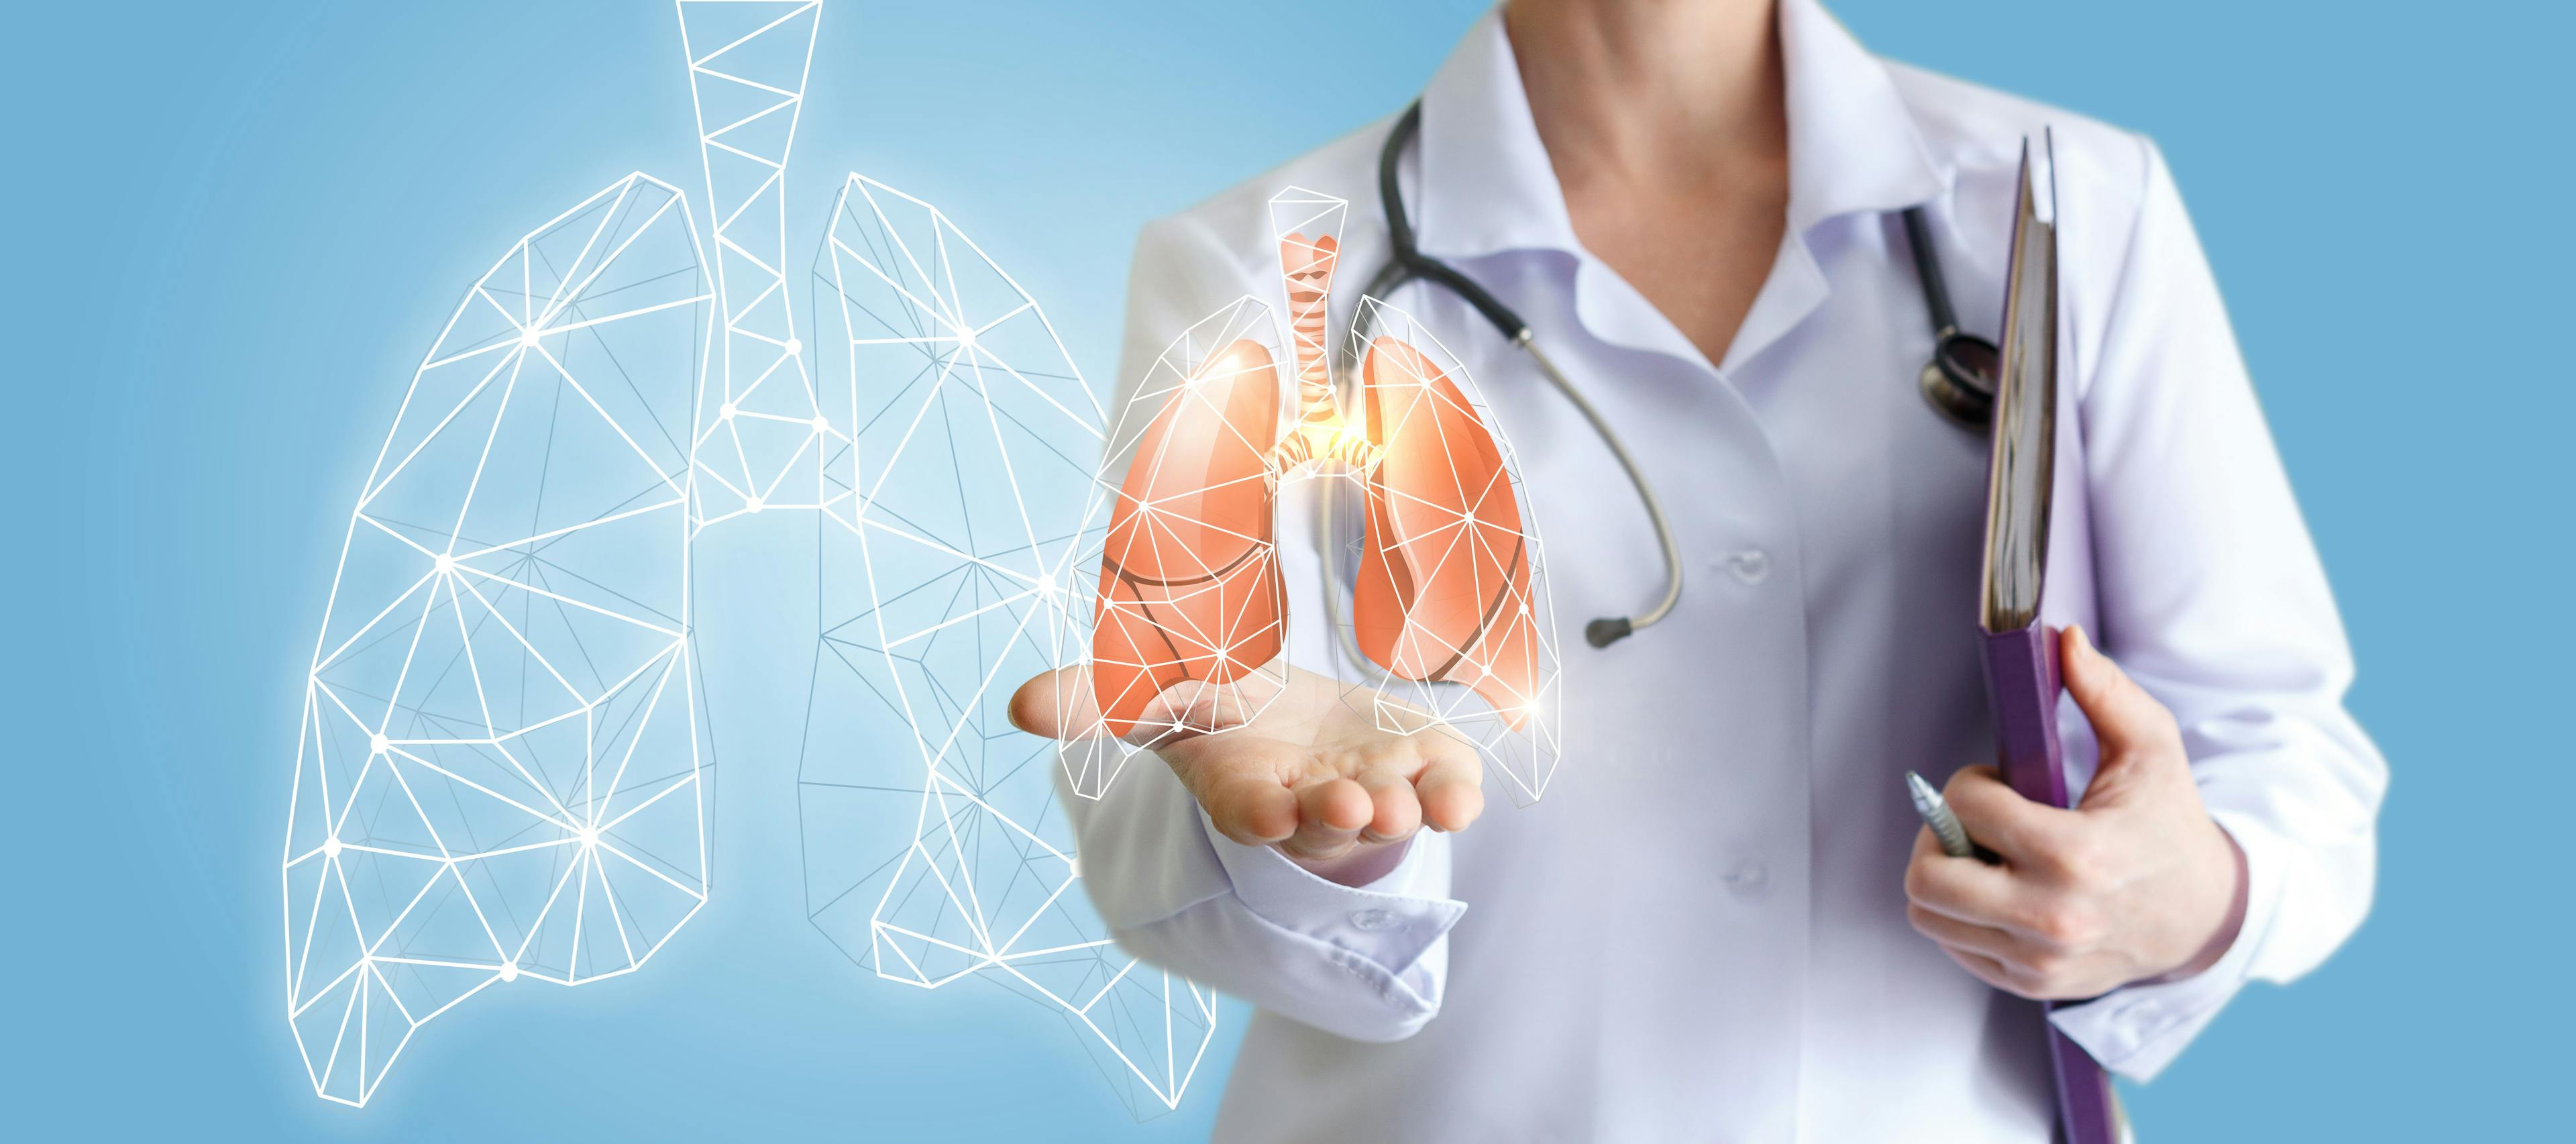 End the Use of Race Adjustment Factor in Pulmonary Function Testing, Authors Say